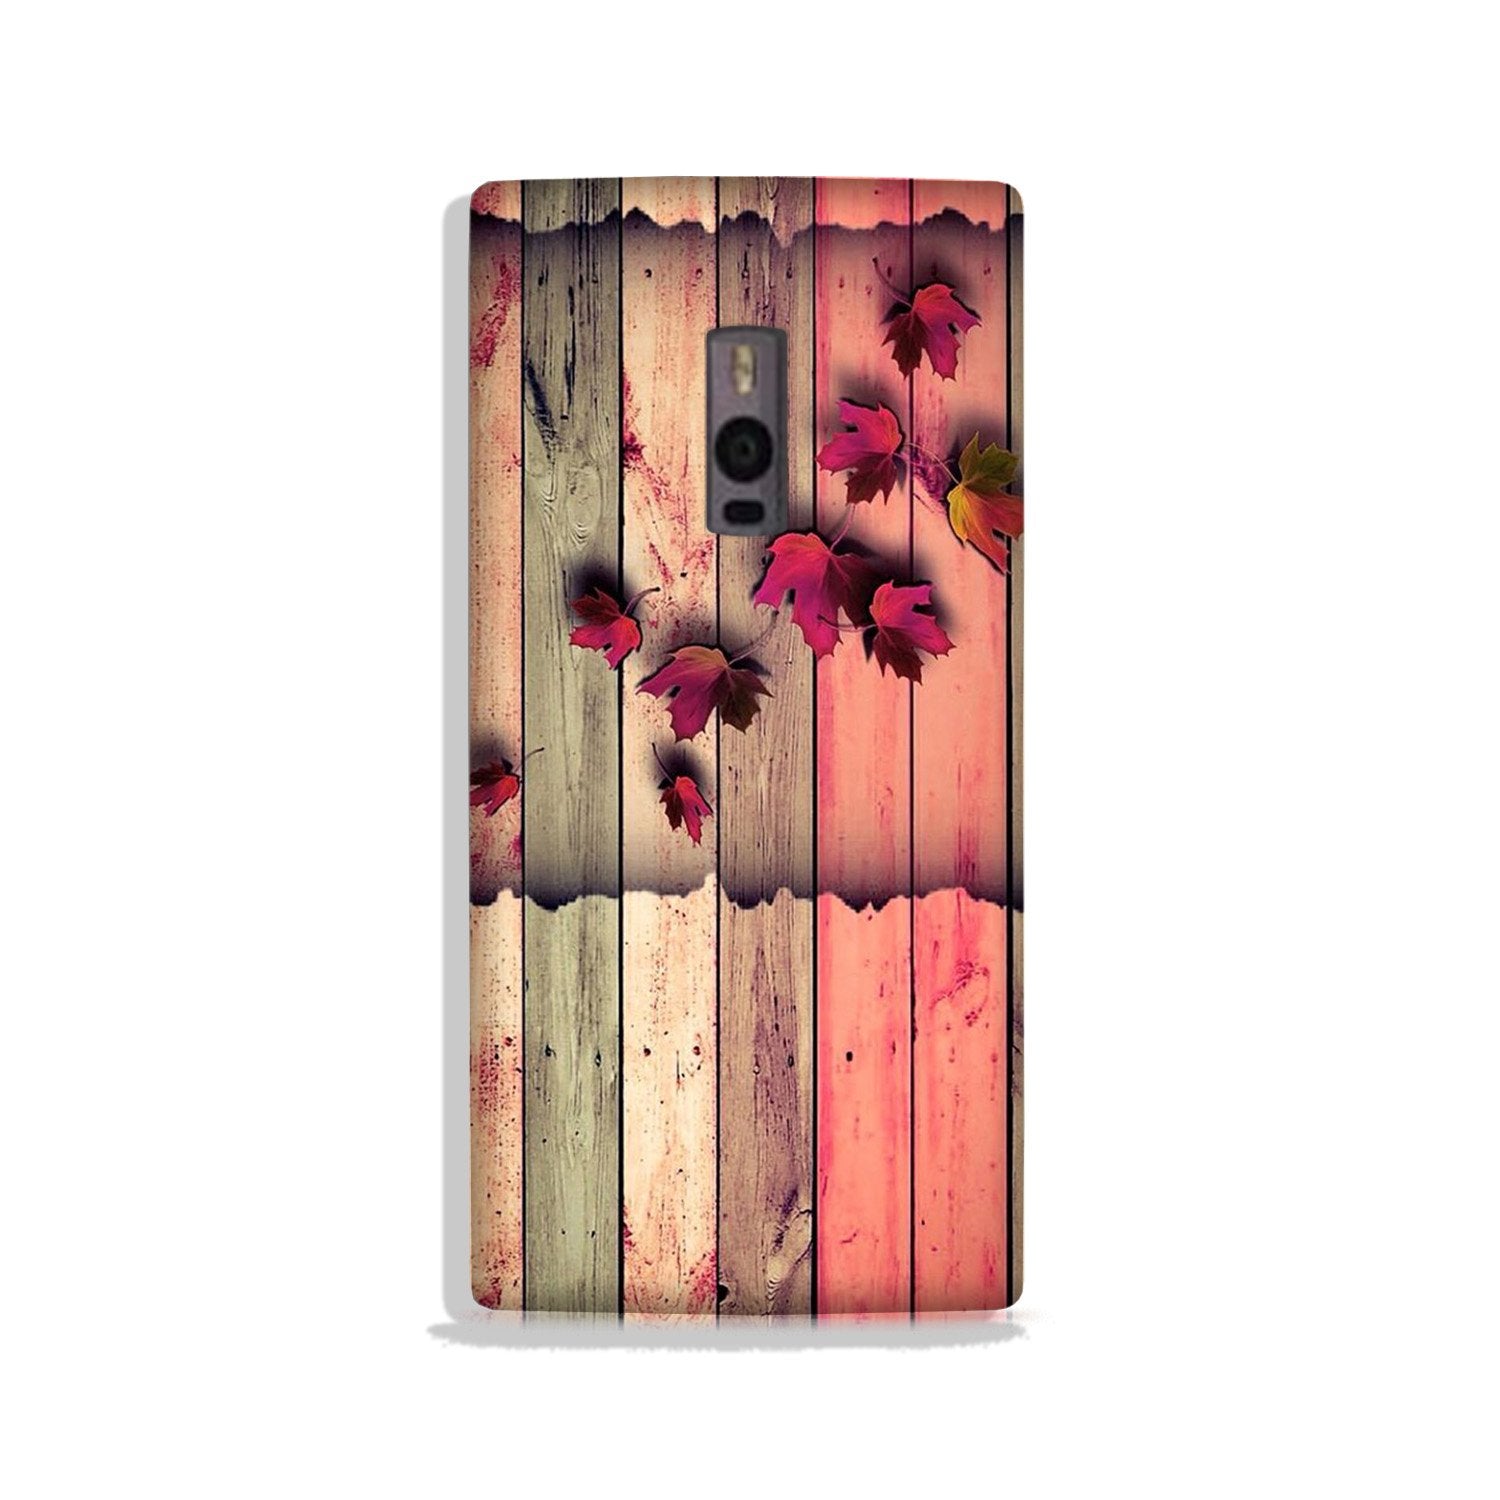 Wooden look2 Case for OnePlus 2